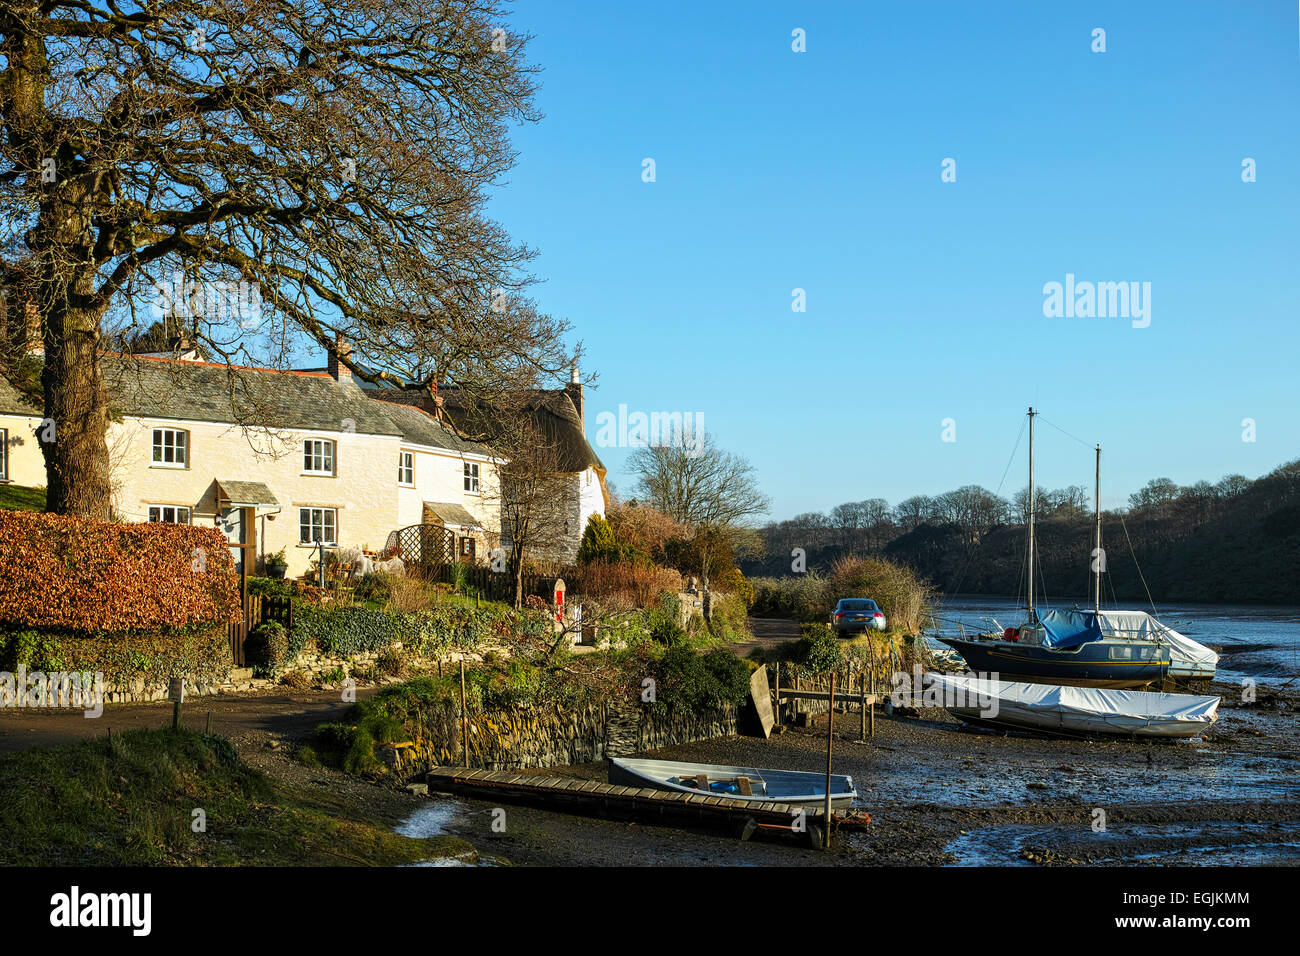 The hamlet of St.Clement by the Tresillian river near Truro in Cornwall, UK Stock Photo